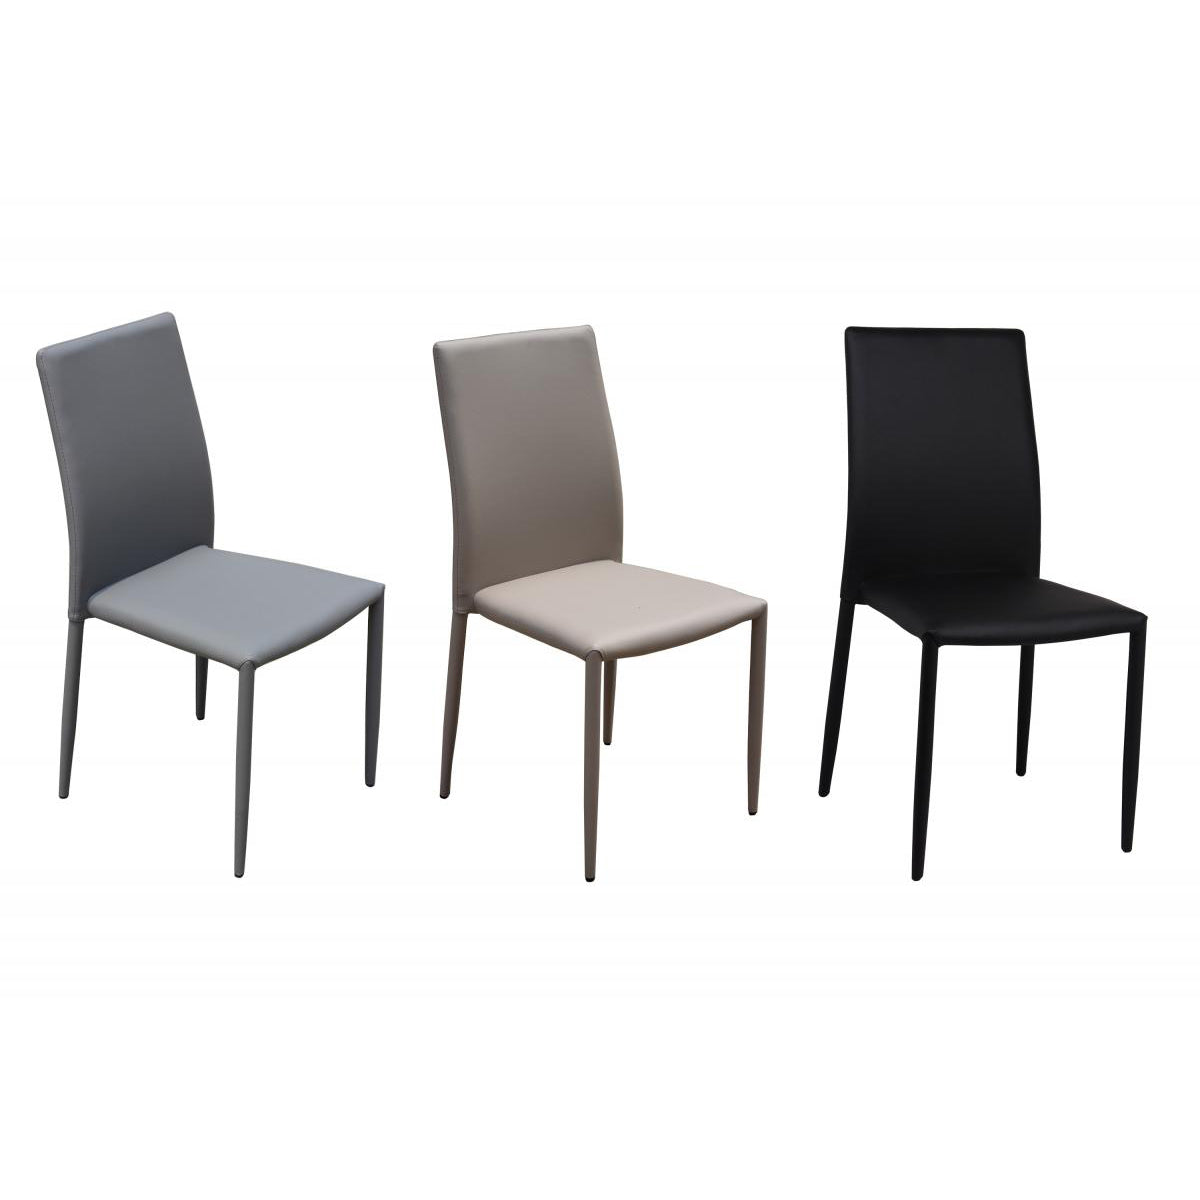 Chatham PU Dining Chair Black With Metal Legs